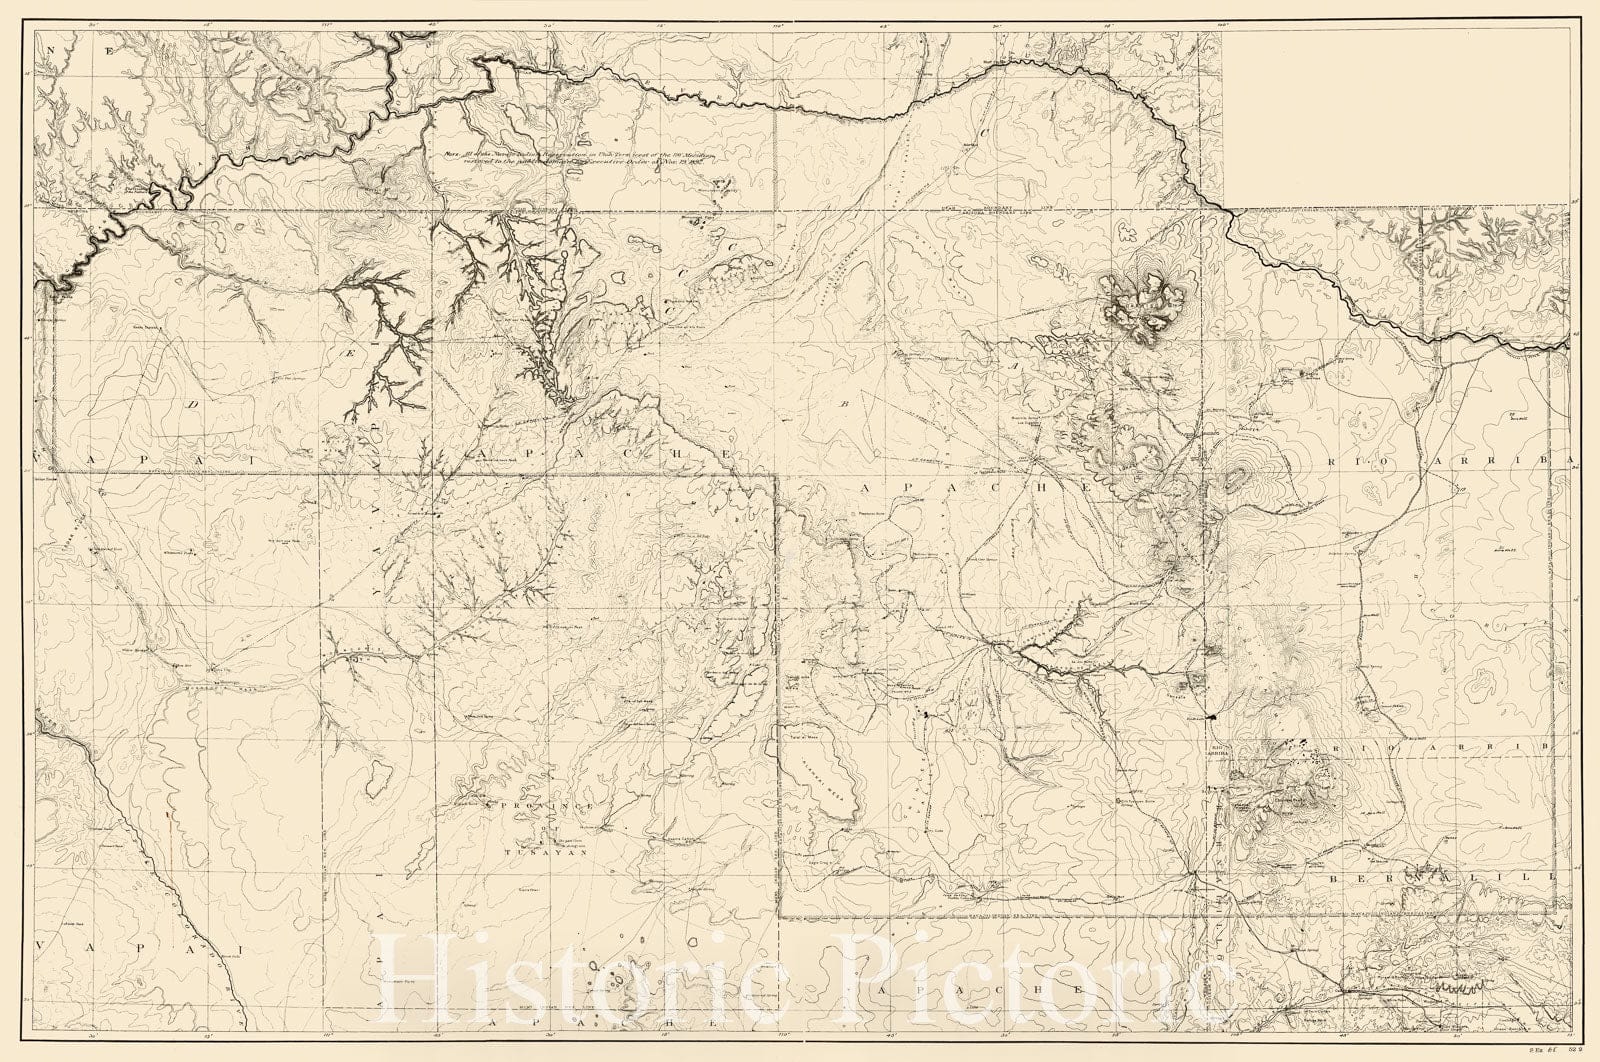 Historic Map - Navajo Nation Reservation - Parts of Arizona, New Mexico & Utah, 1893, United States Department of the Interior - Vintage Wall Art